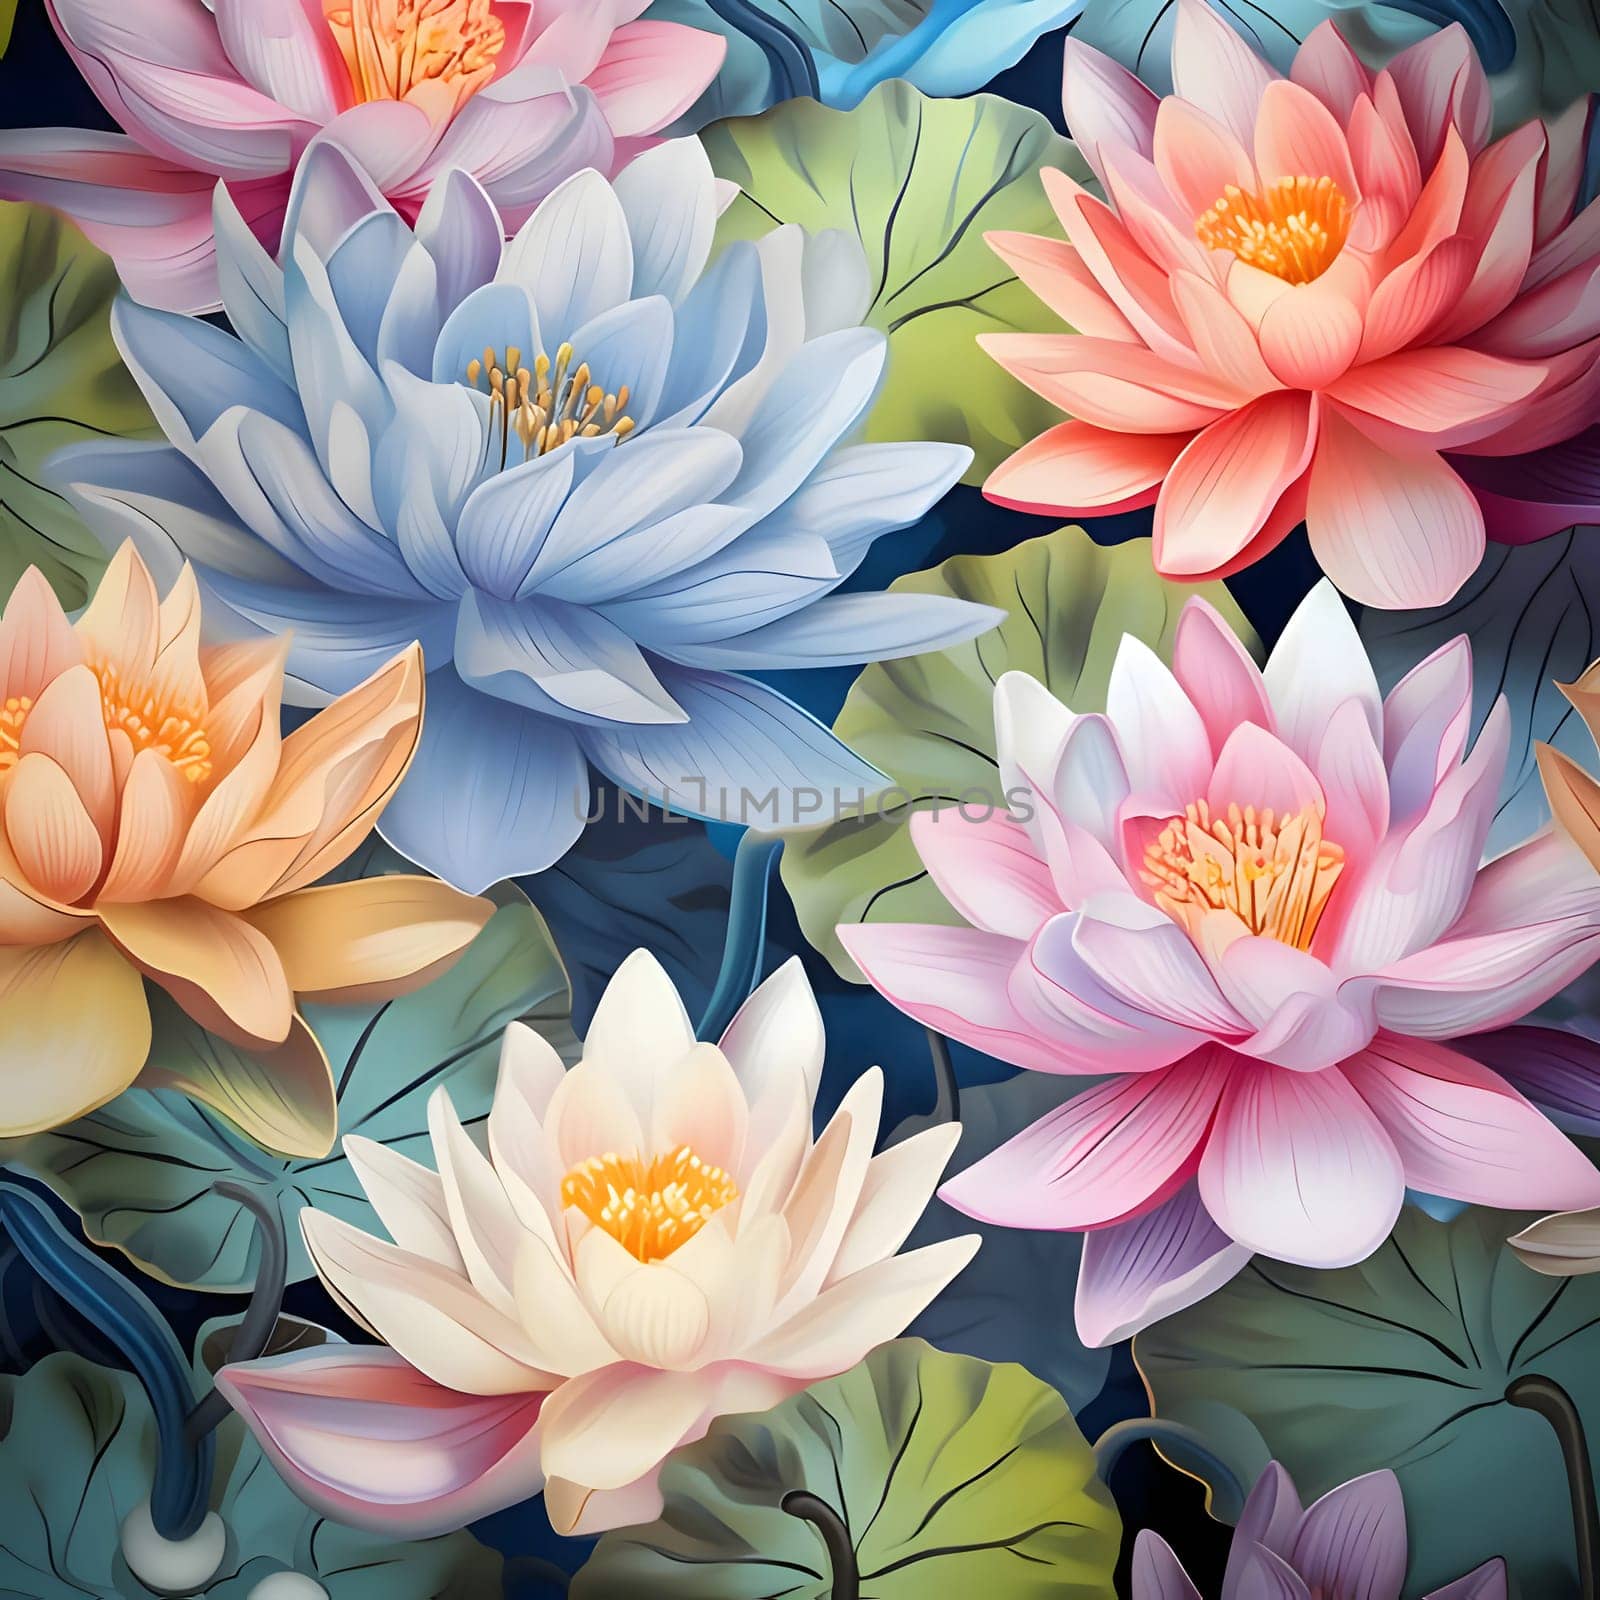 Patterns and banners backgrounds: Seamless pattern with water lilies. Vector illustration. EPS 10